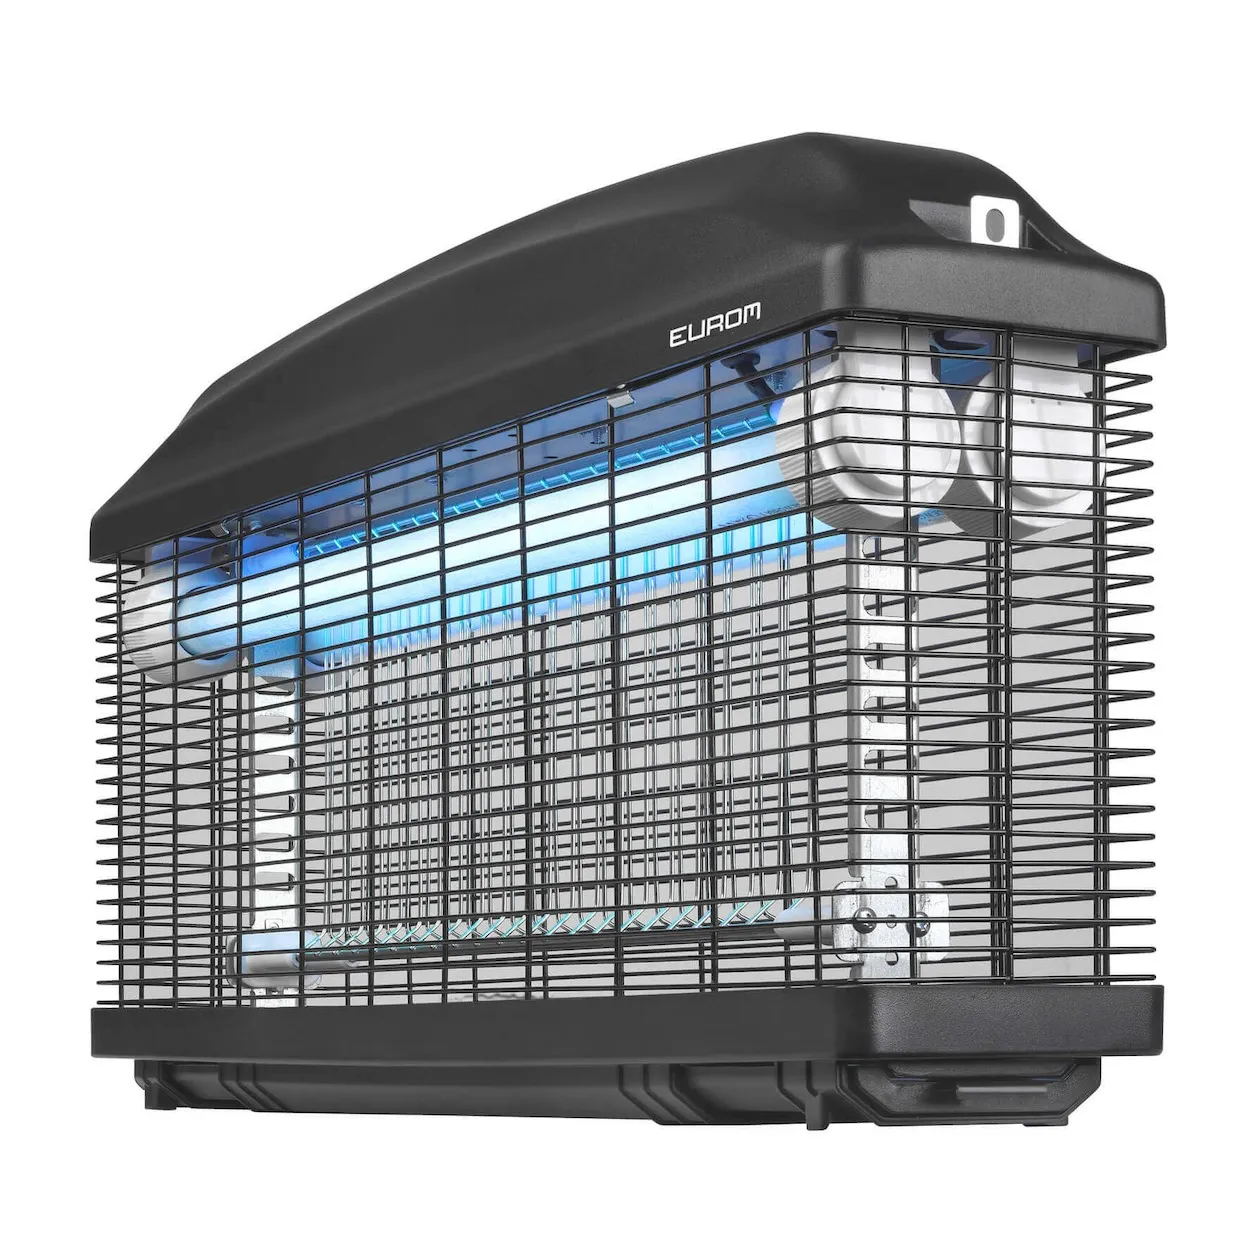 Eurom Fly Away 30 IPX4-2 Insect killer